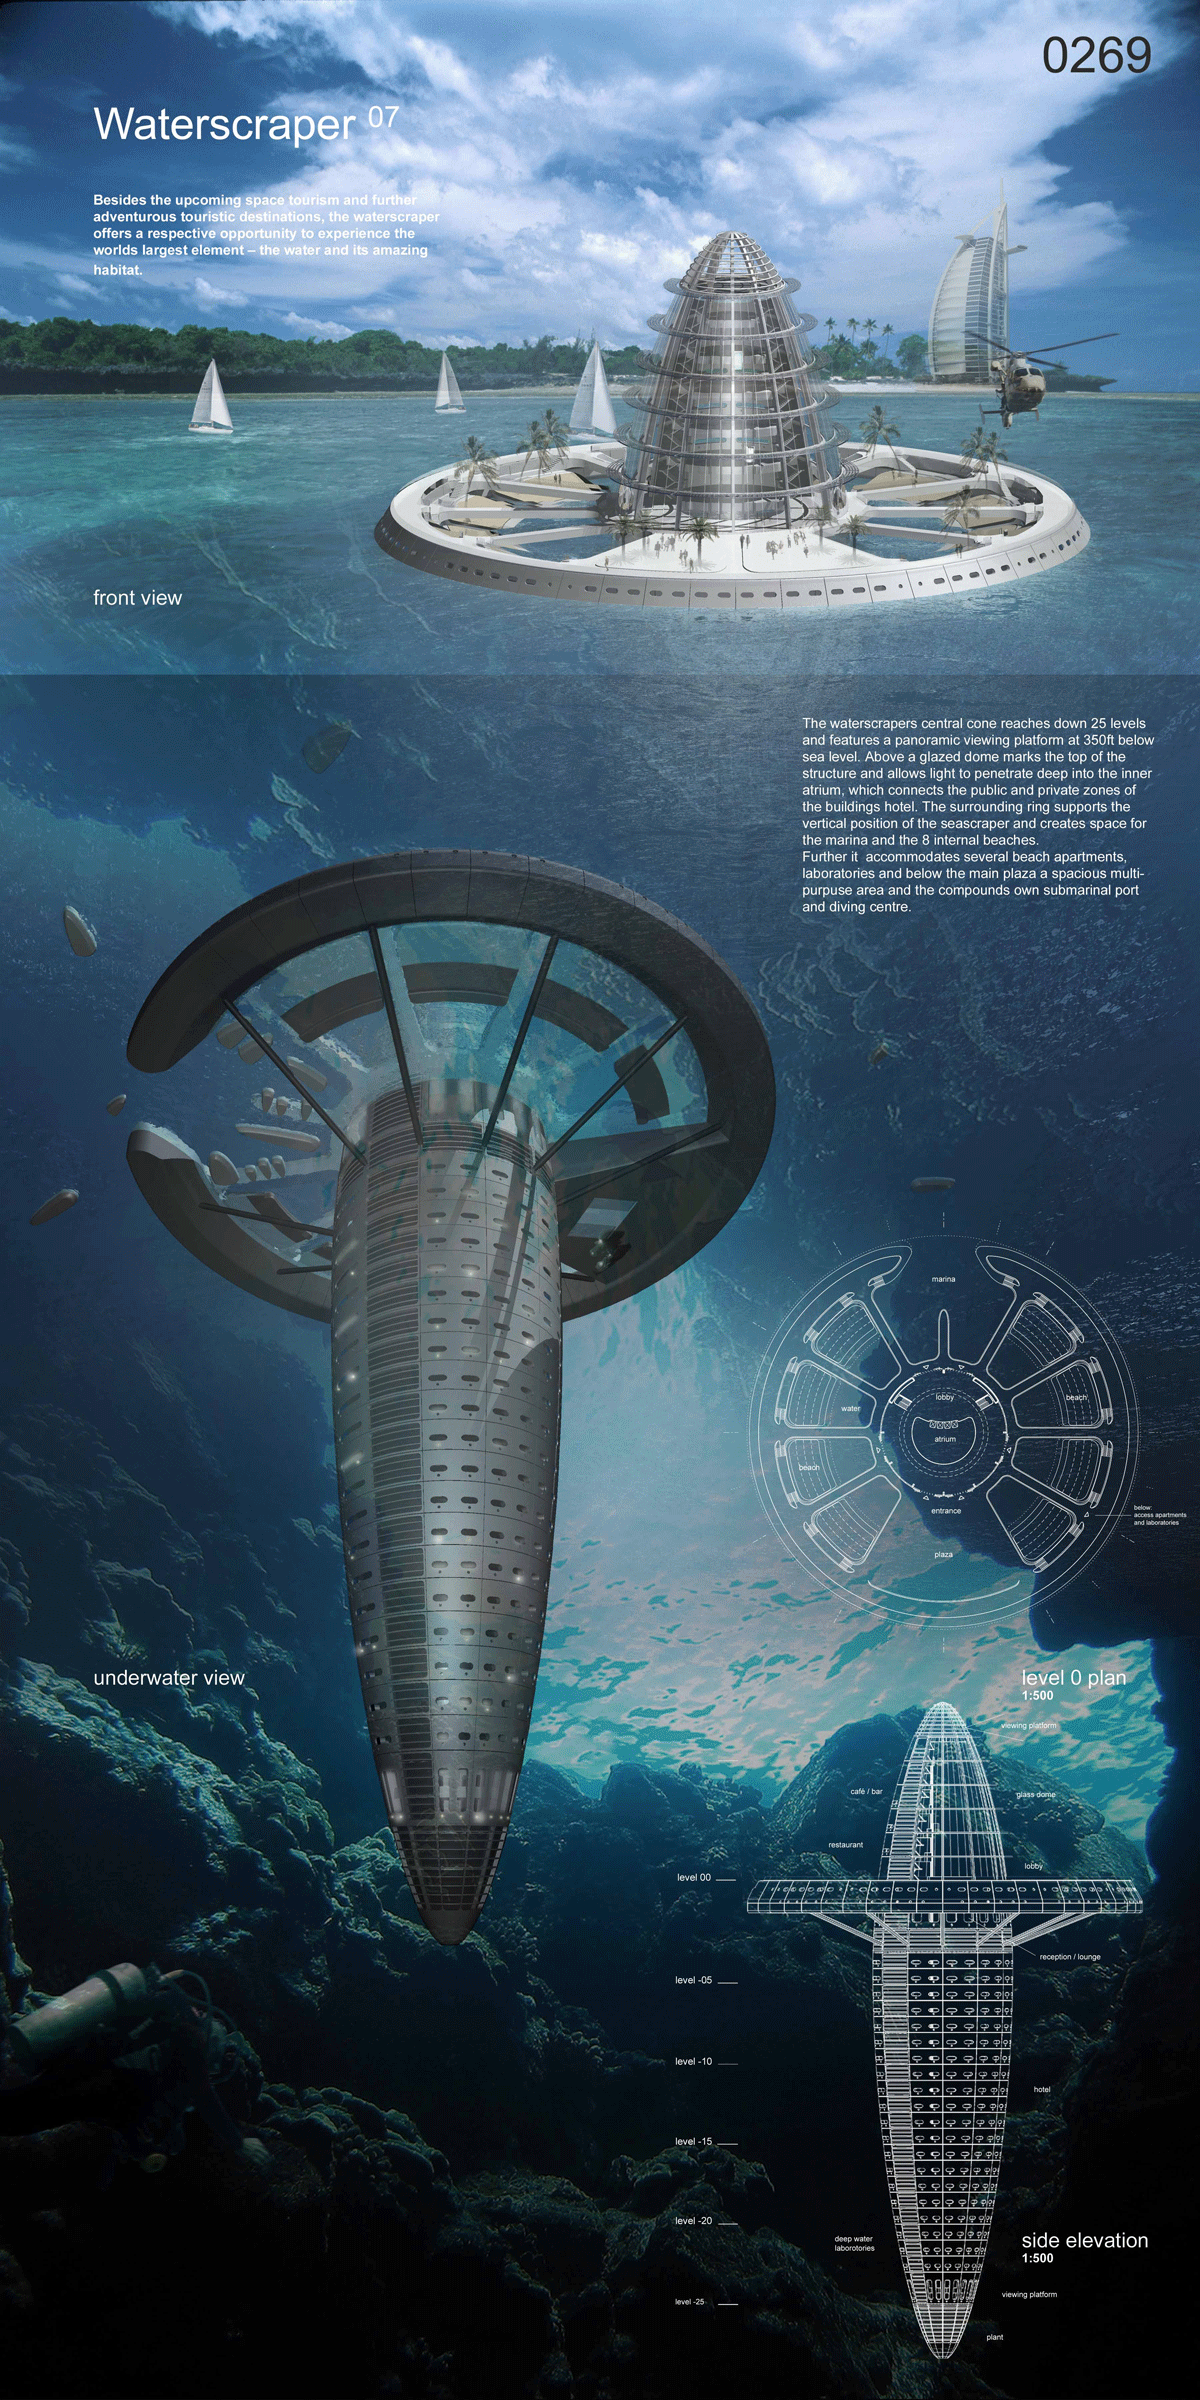 Drilling Water-Scraper: Power Plant And Underwater Recycling Center- eVolo